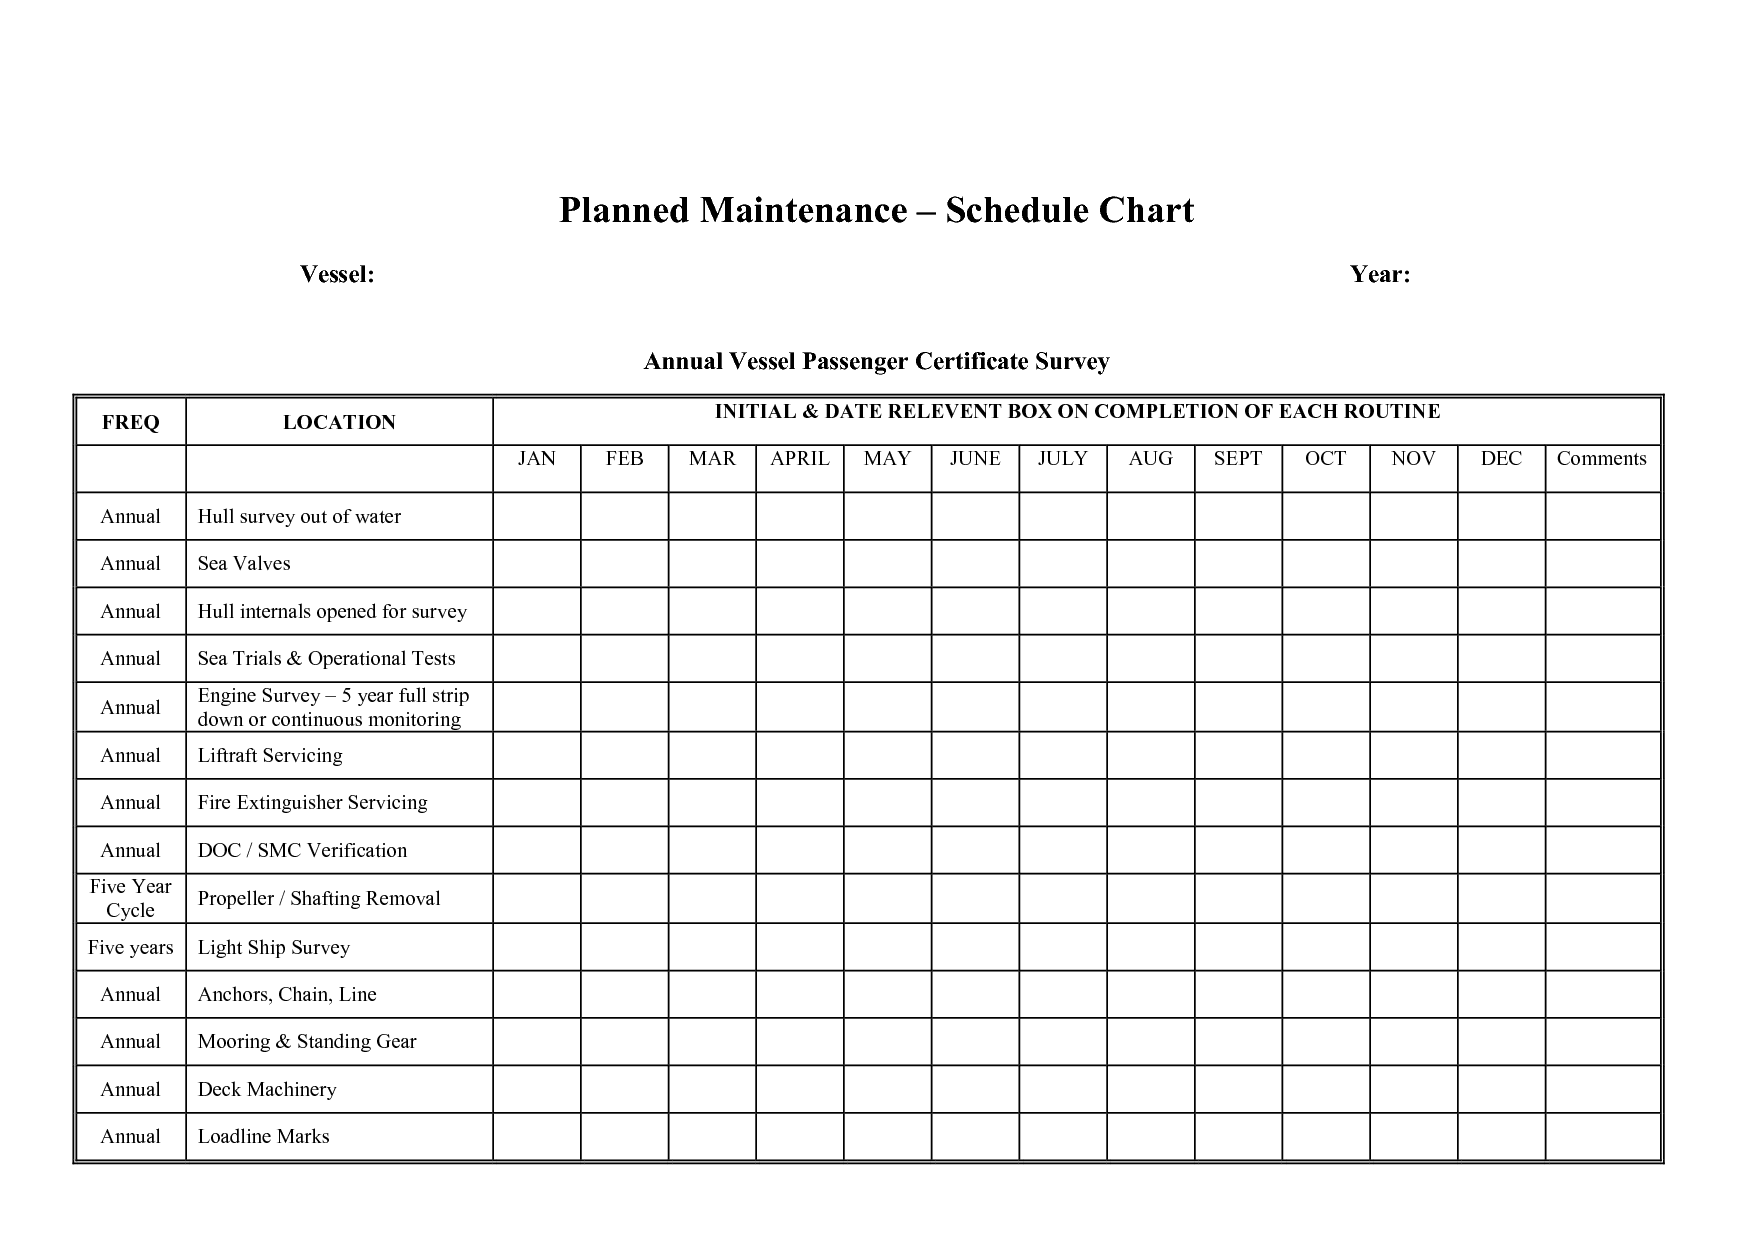 10 Best Images of Schedule Chart Template Planned Maintenance 